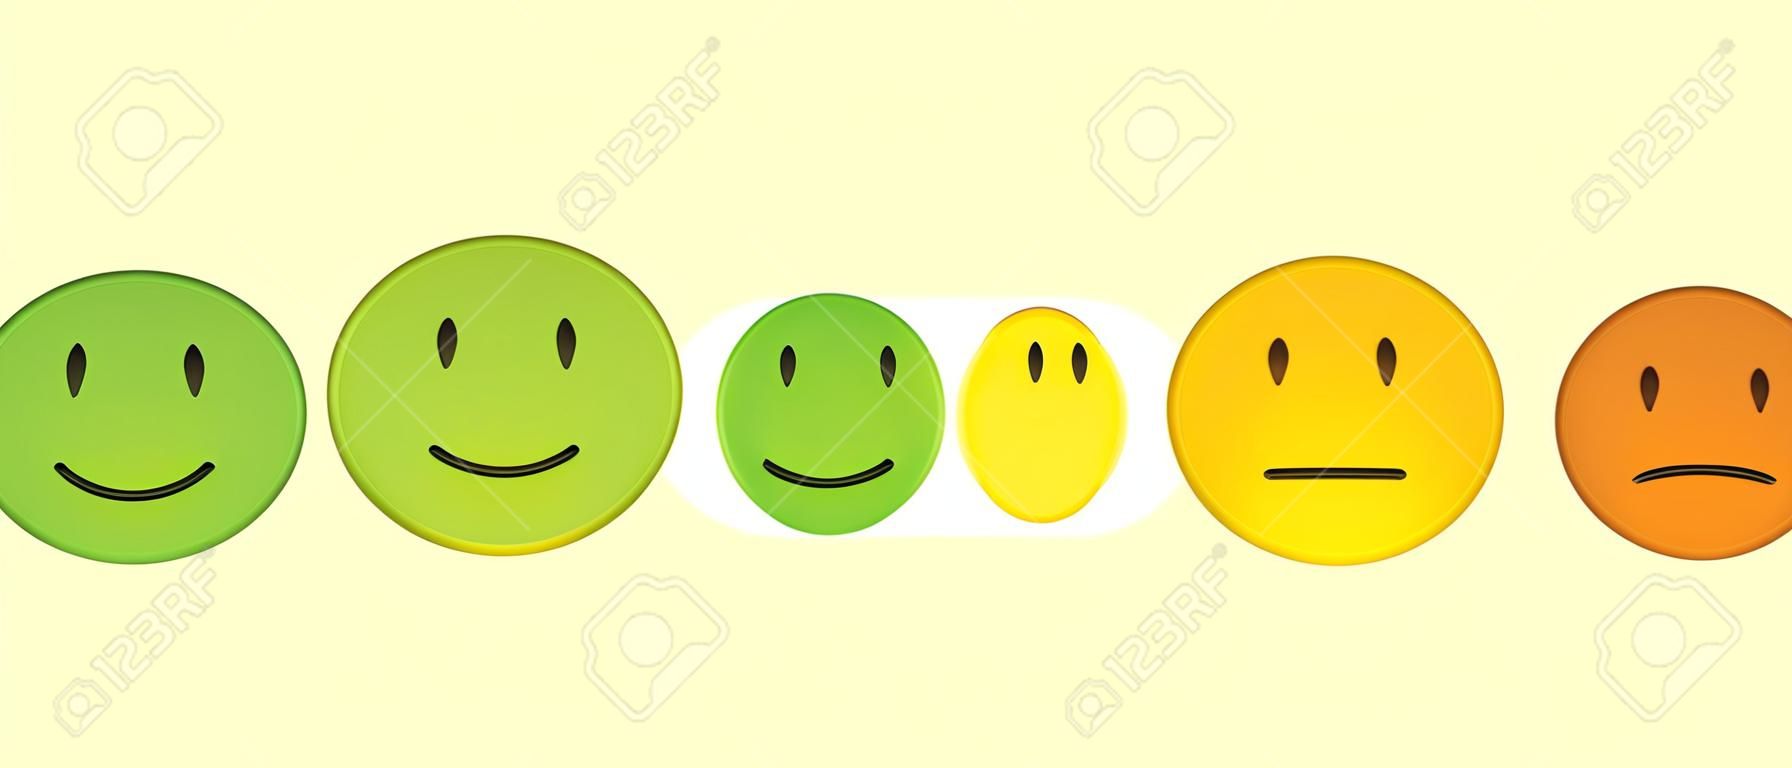 Colored faces for feedback or mood vector icons.